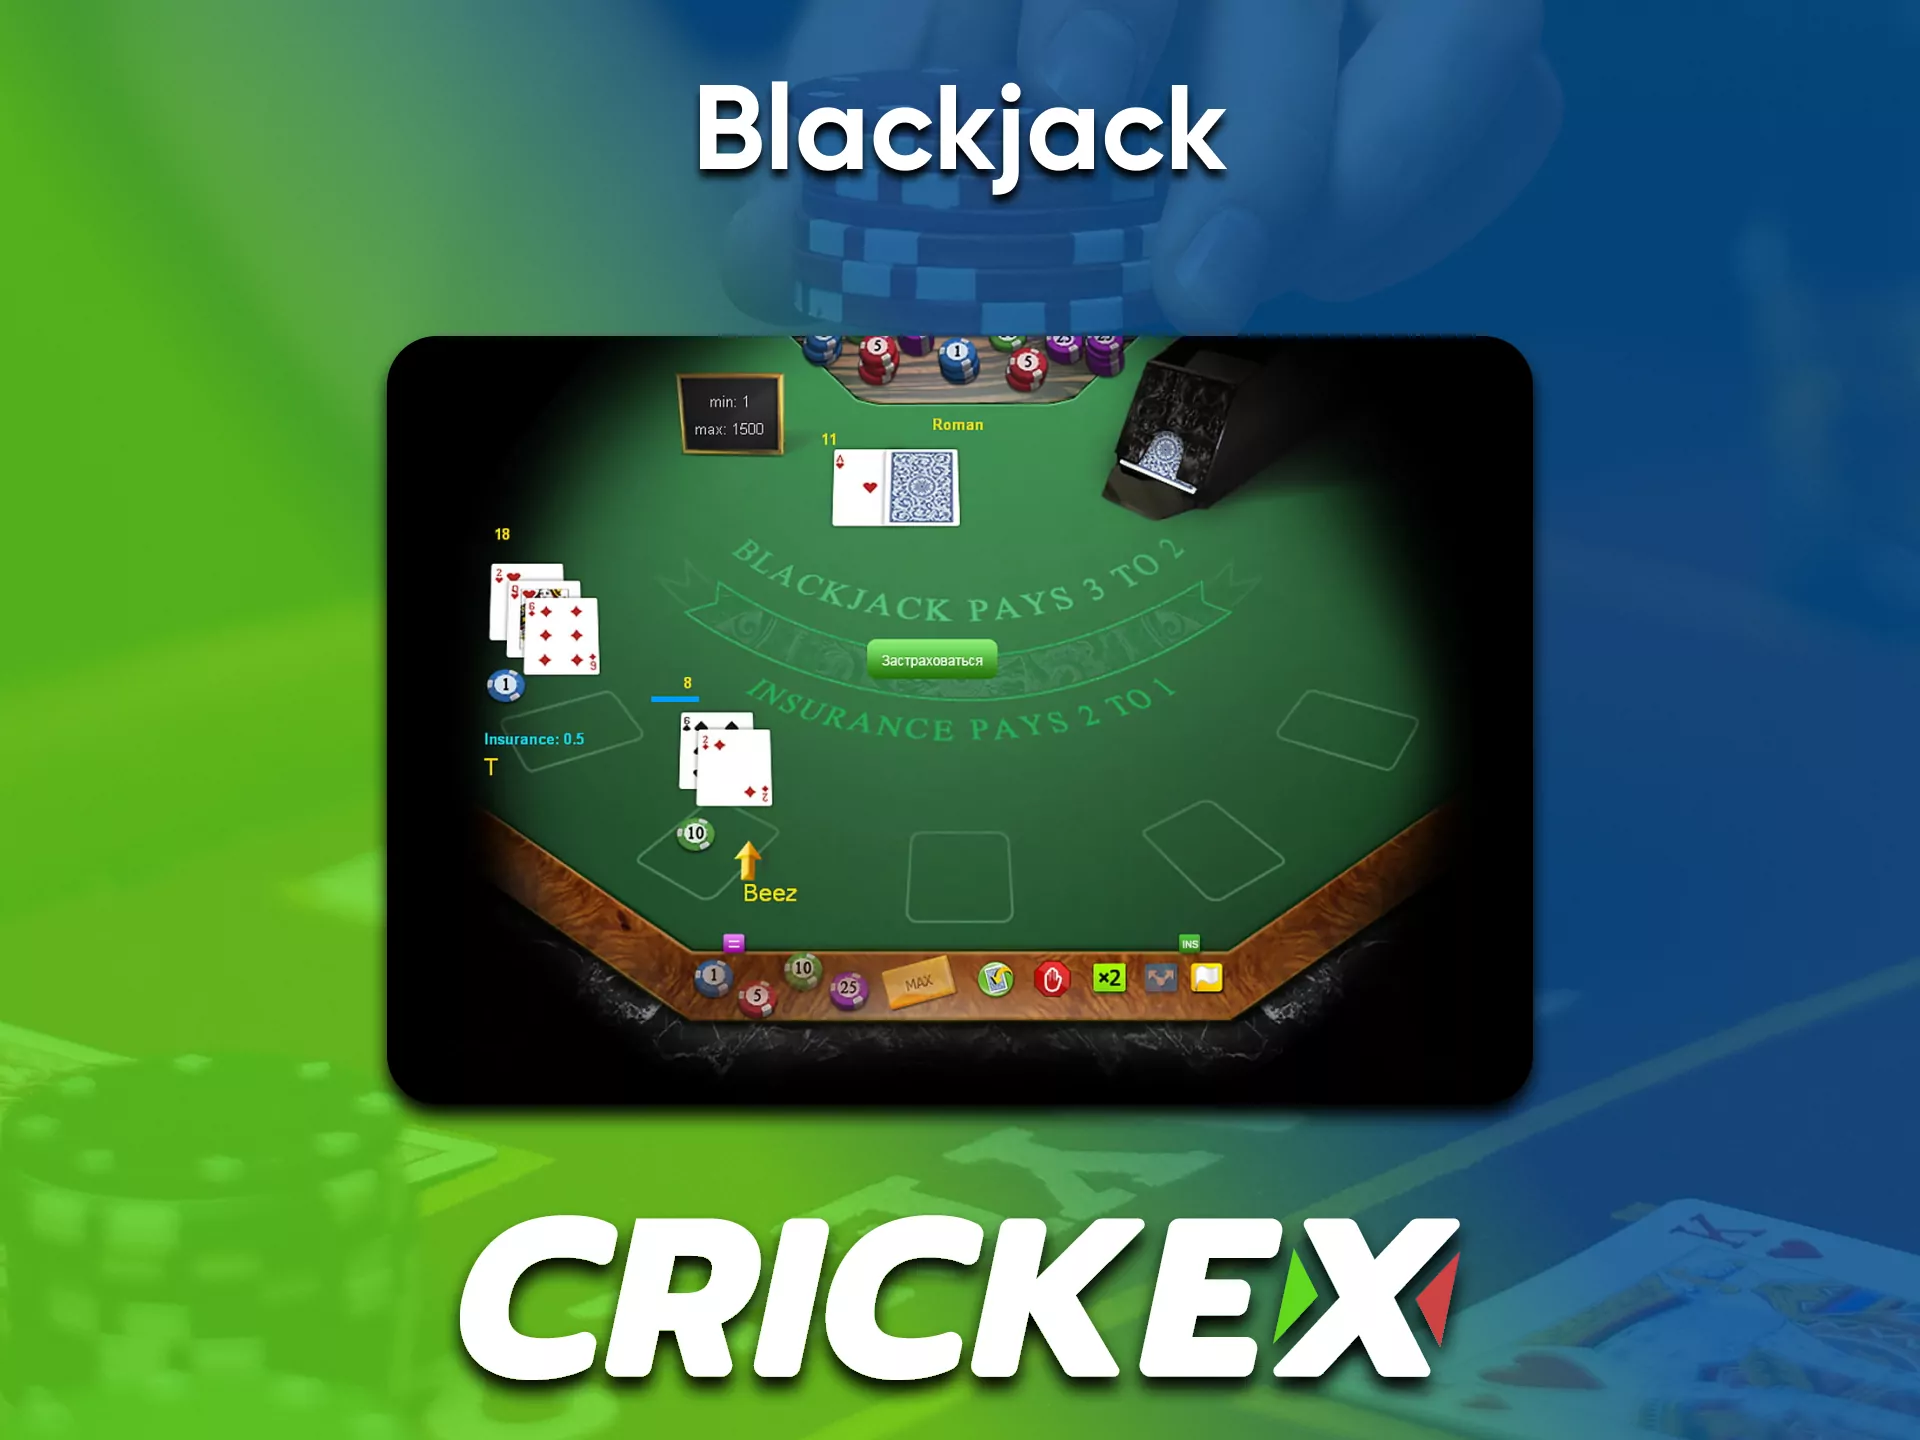 Use the Crickex casino to play Blackjack with real dealers and other users.